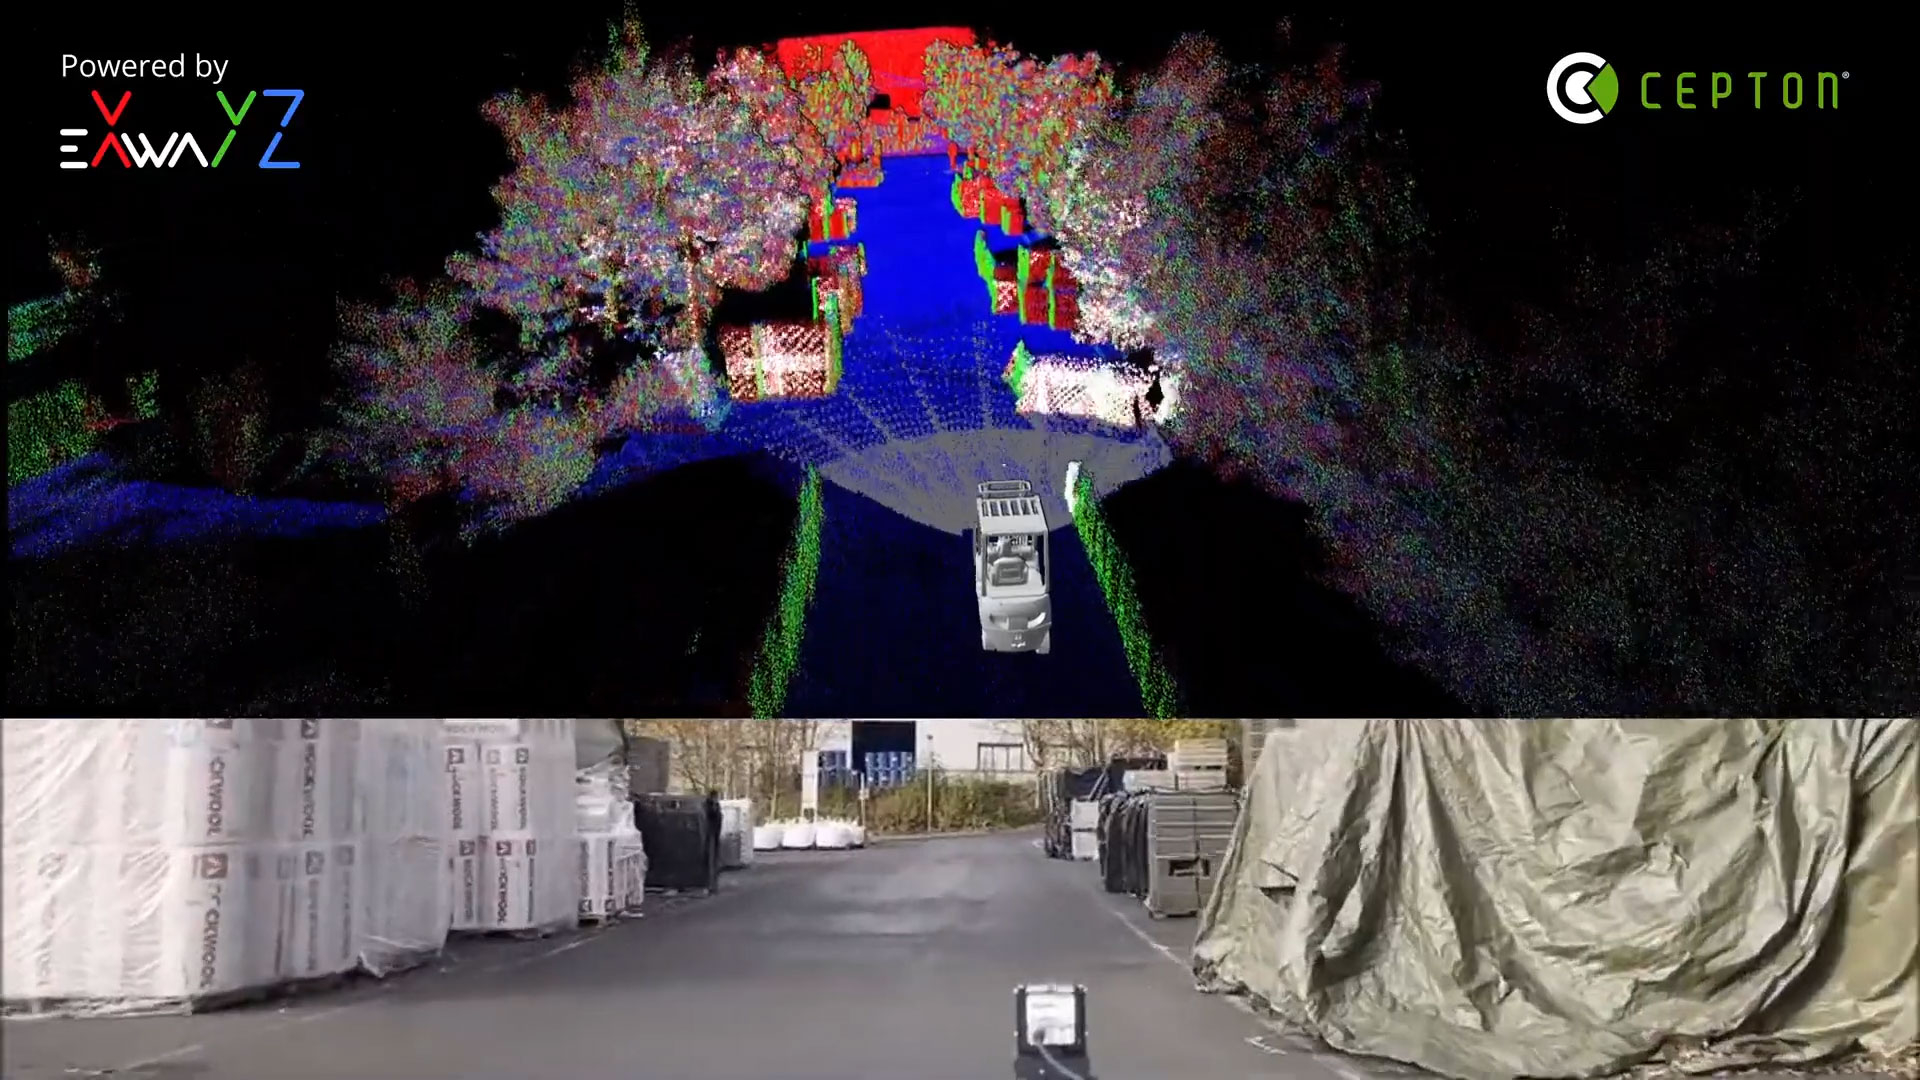 Exwayz used Cepton’s Nova lidar to demonstrate near-range object detection and classification for mobile robotics. Video courtesy of Exwayz.